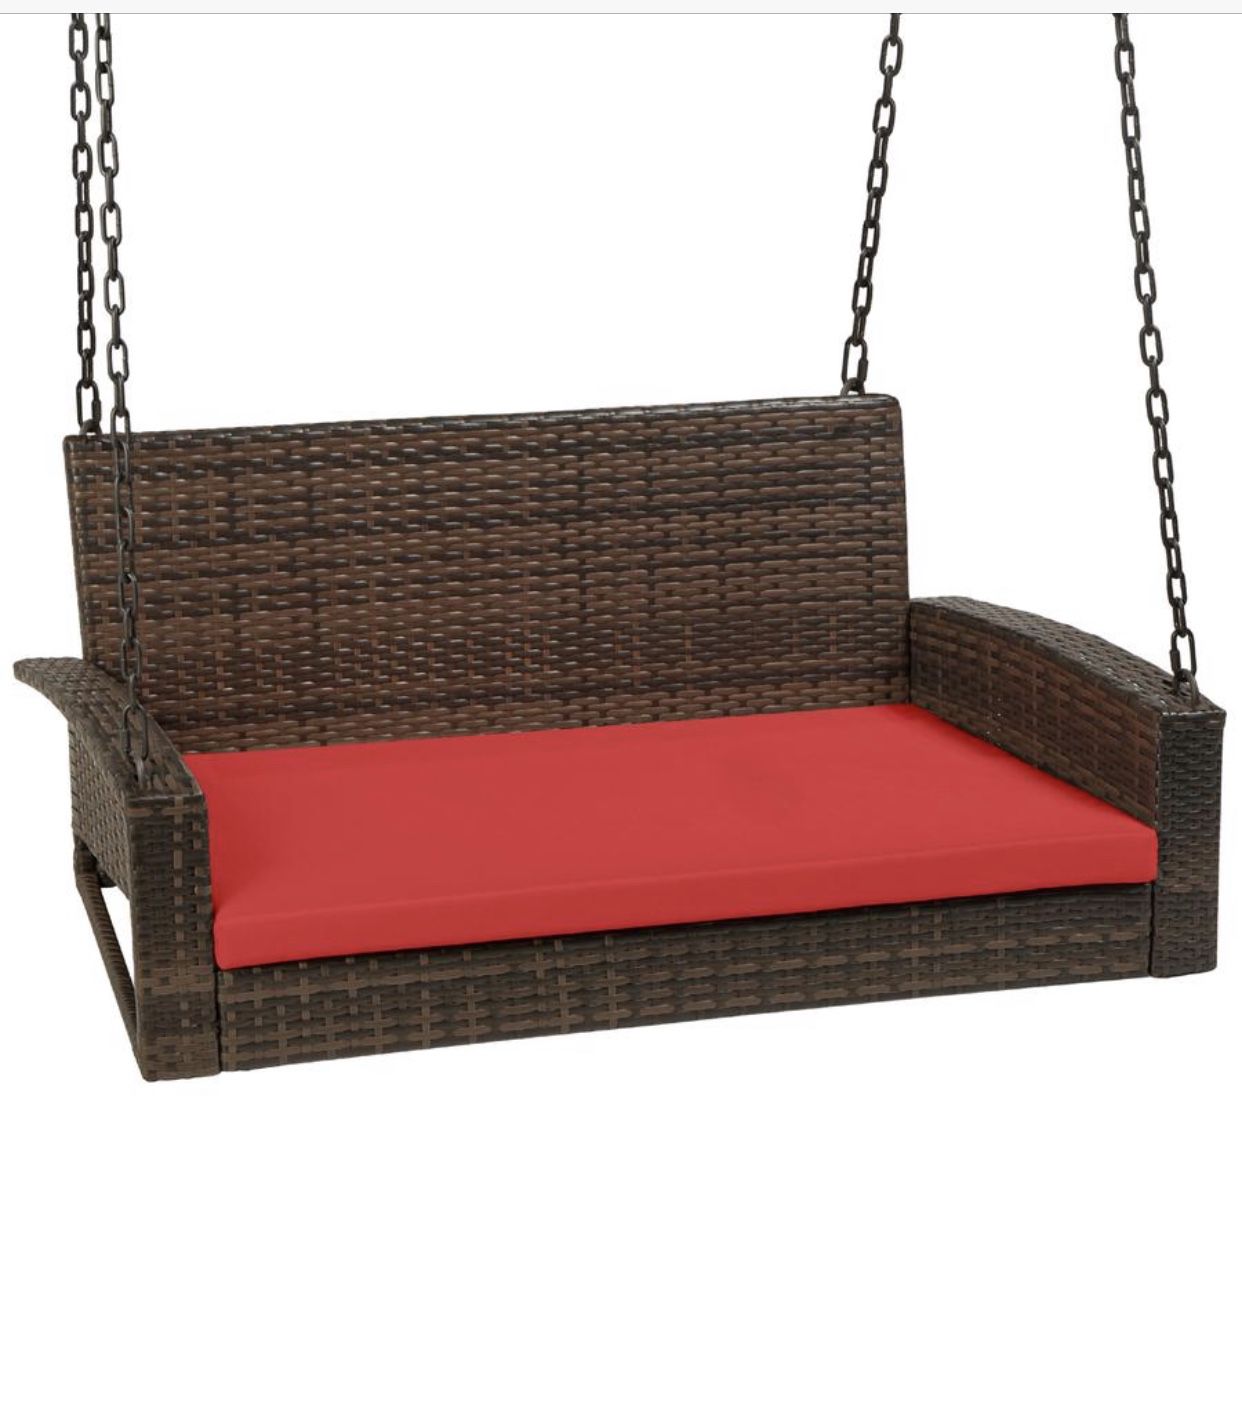 New in box Woven Wicker Hanging Porch Swing Bench w/ Mounting Chains, Seat Cushion